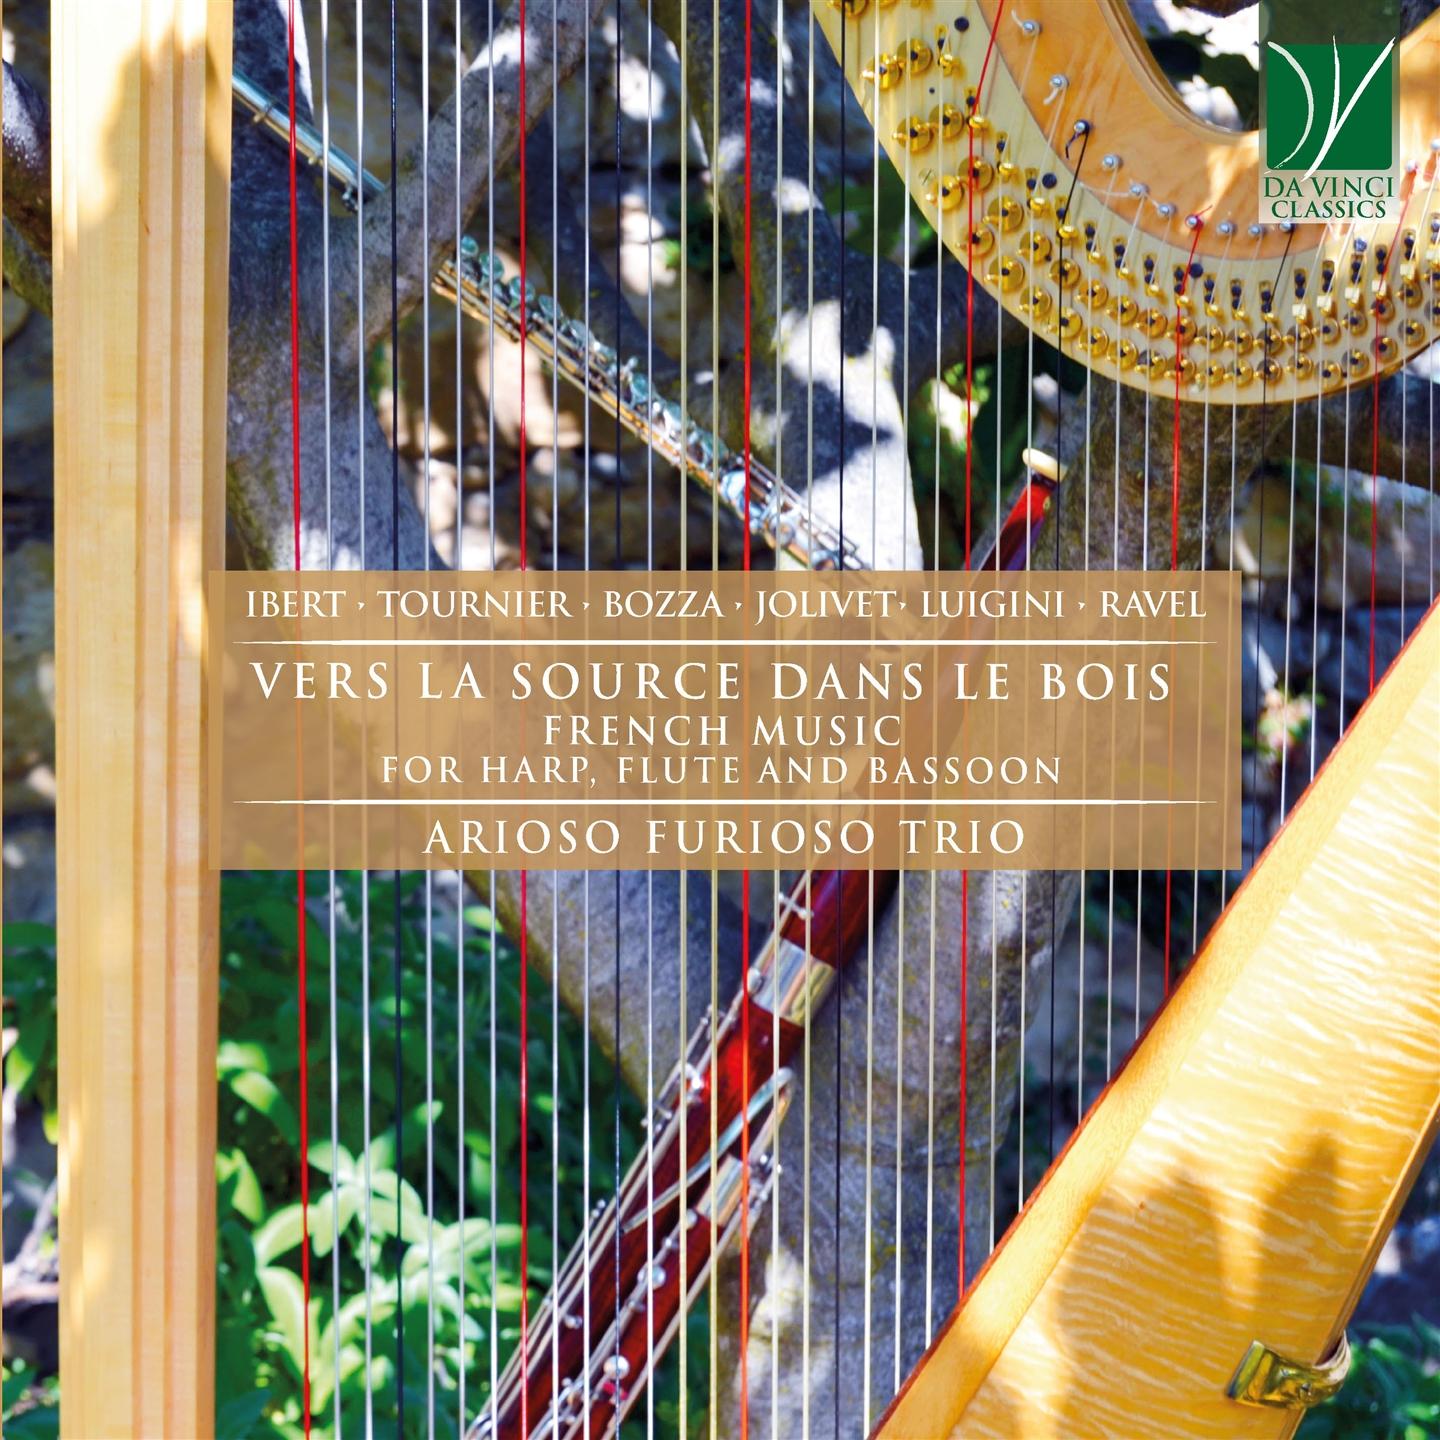 VERS LA SOURCE DANS LE BOIS - FRENCH MUSIC FOR HARP, FLUTE AND BASSOON